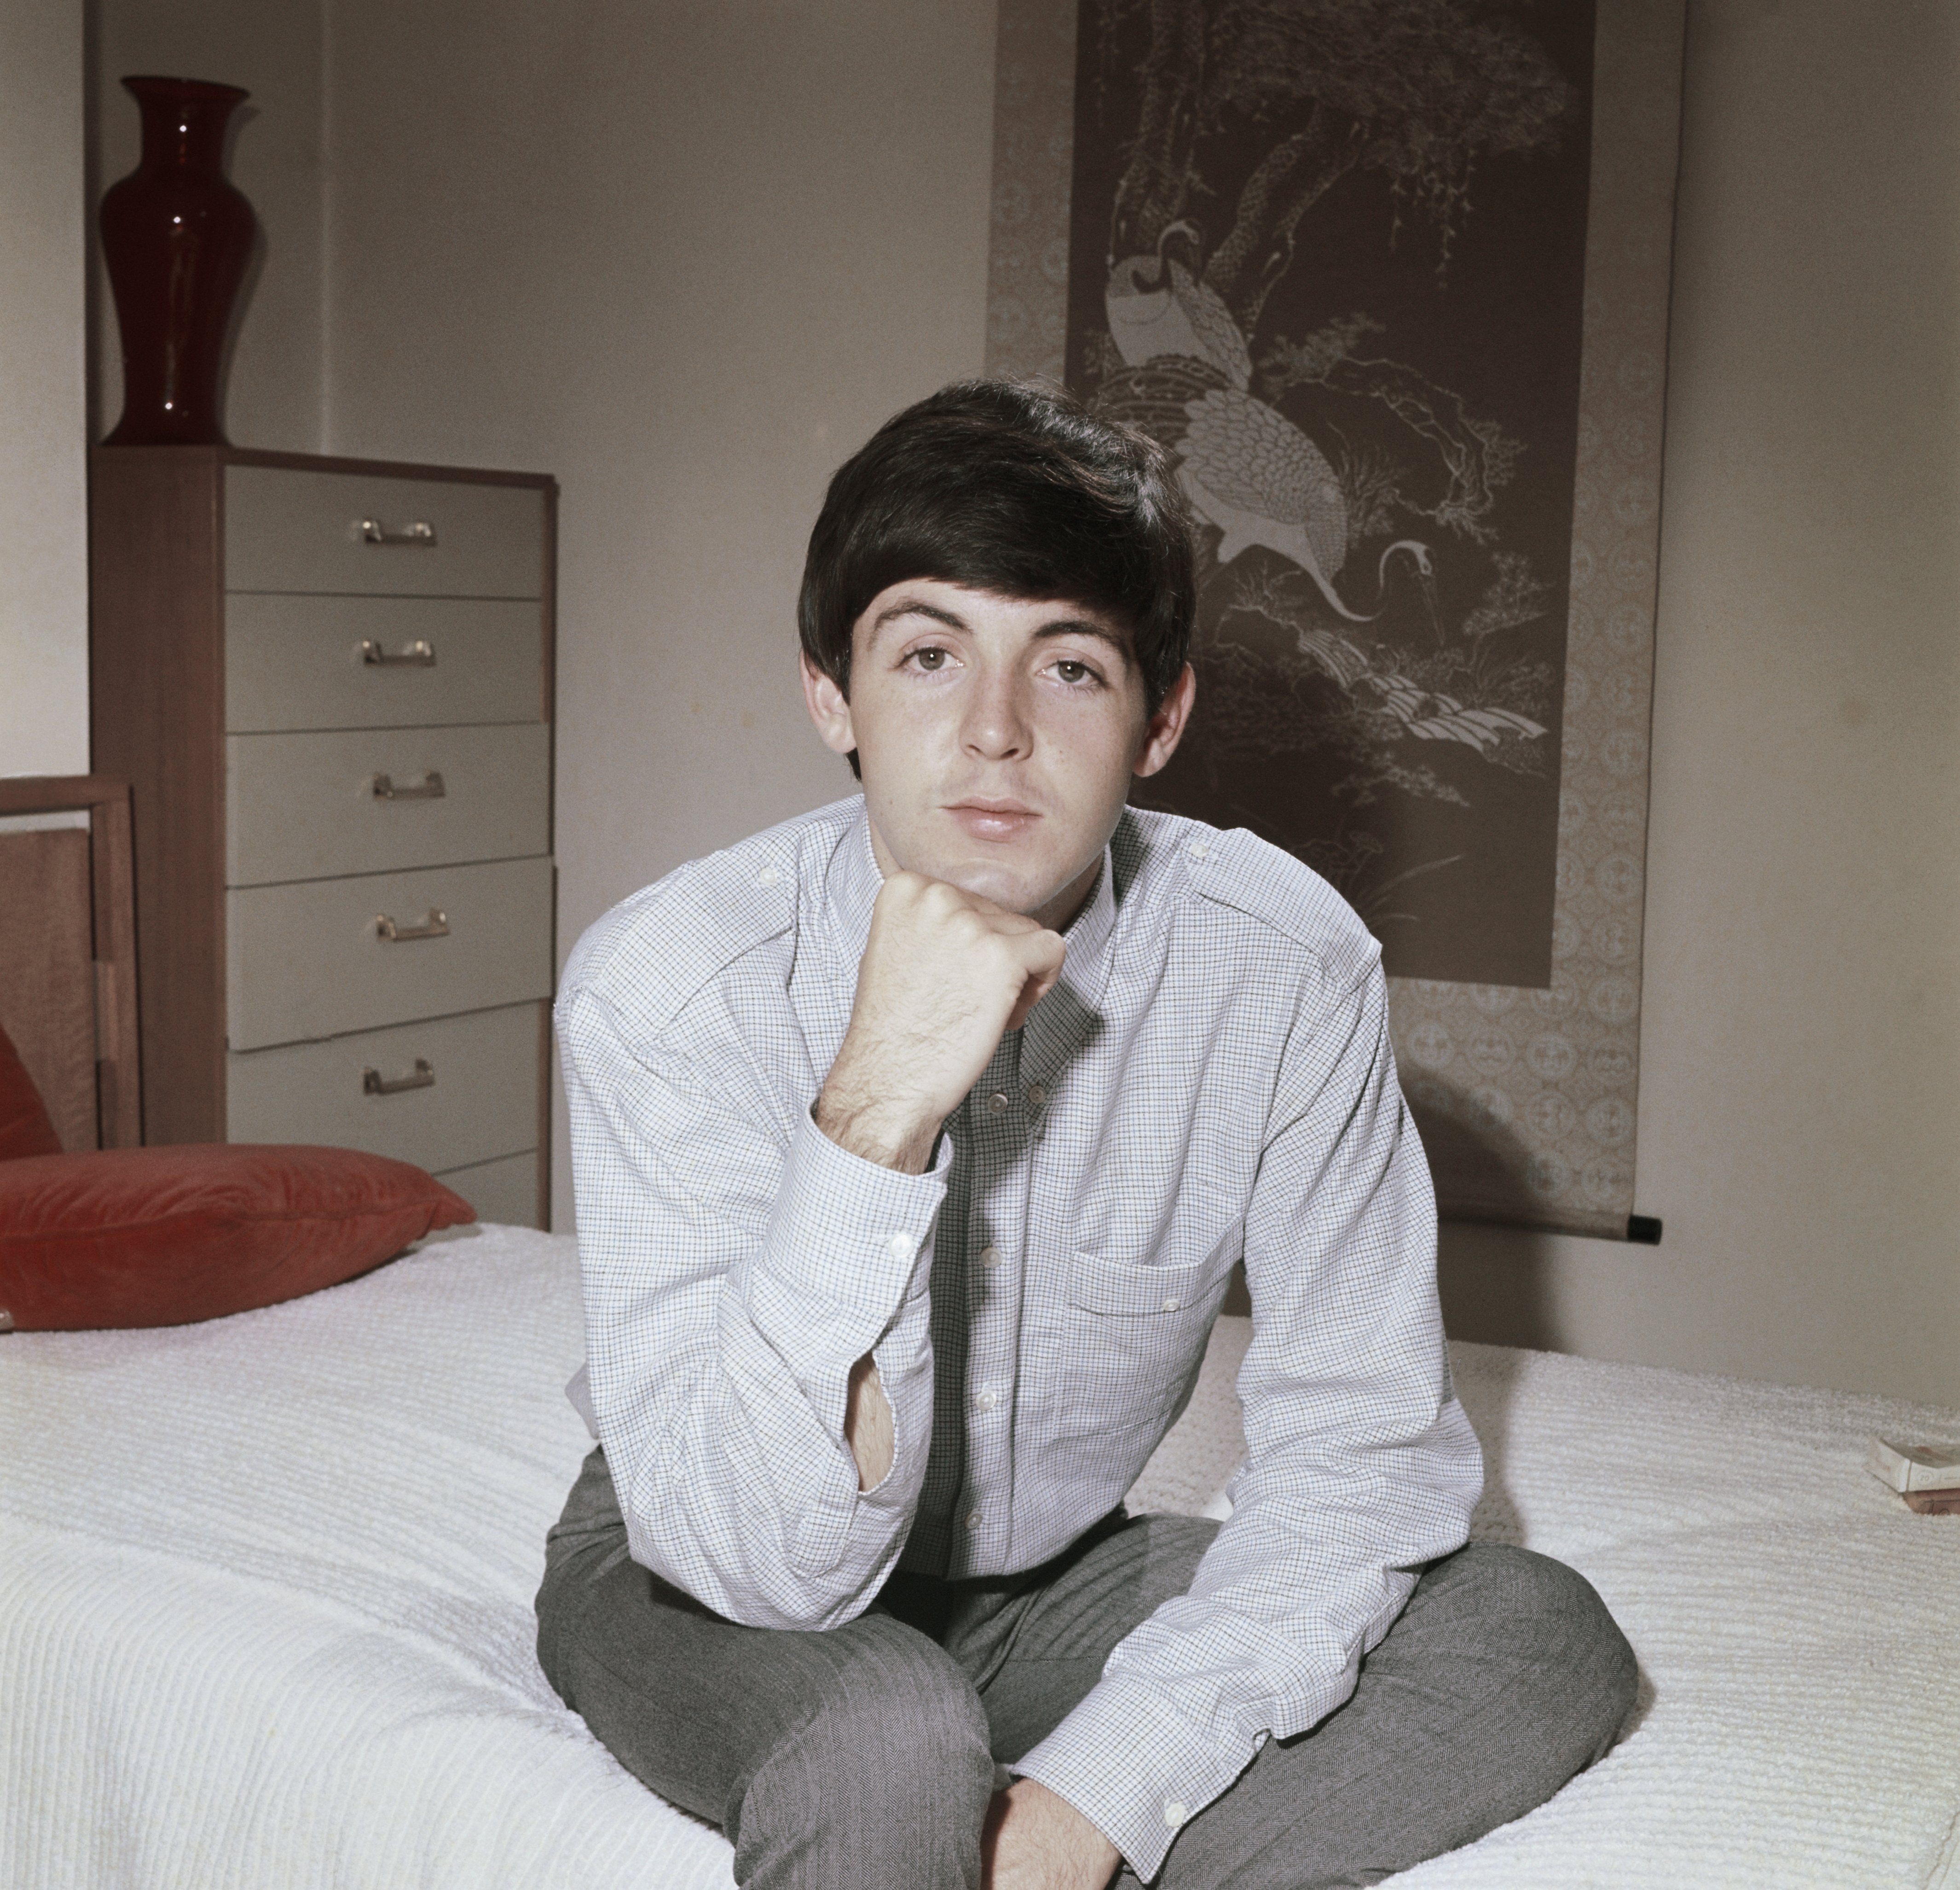 Bassist Paul McCartney of the rock band "The Beatles" poses for a portrait sitting on a bed in circa 1964 in London, England circa 1964 | Source: Getty Images 